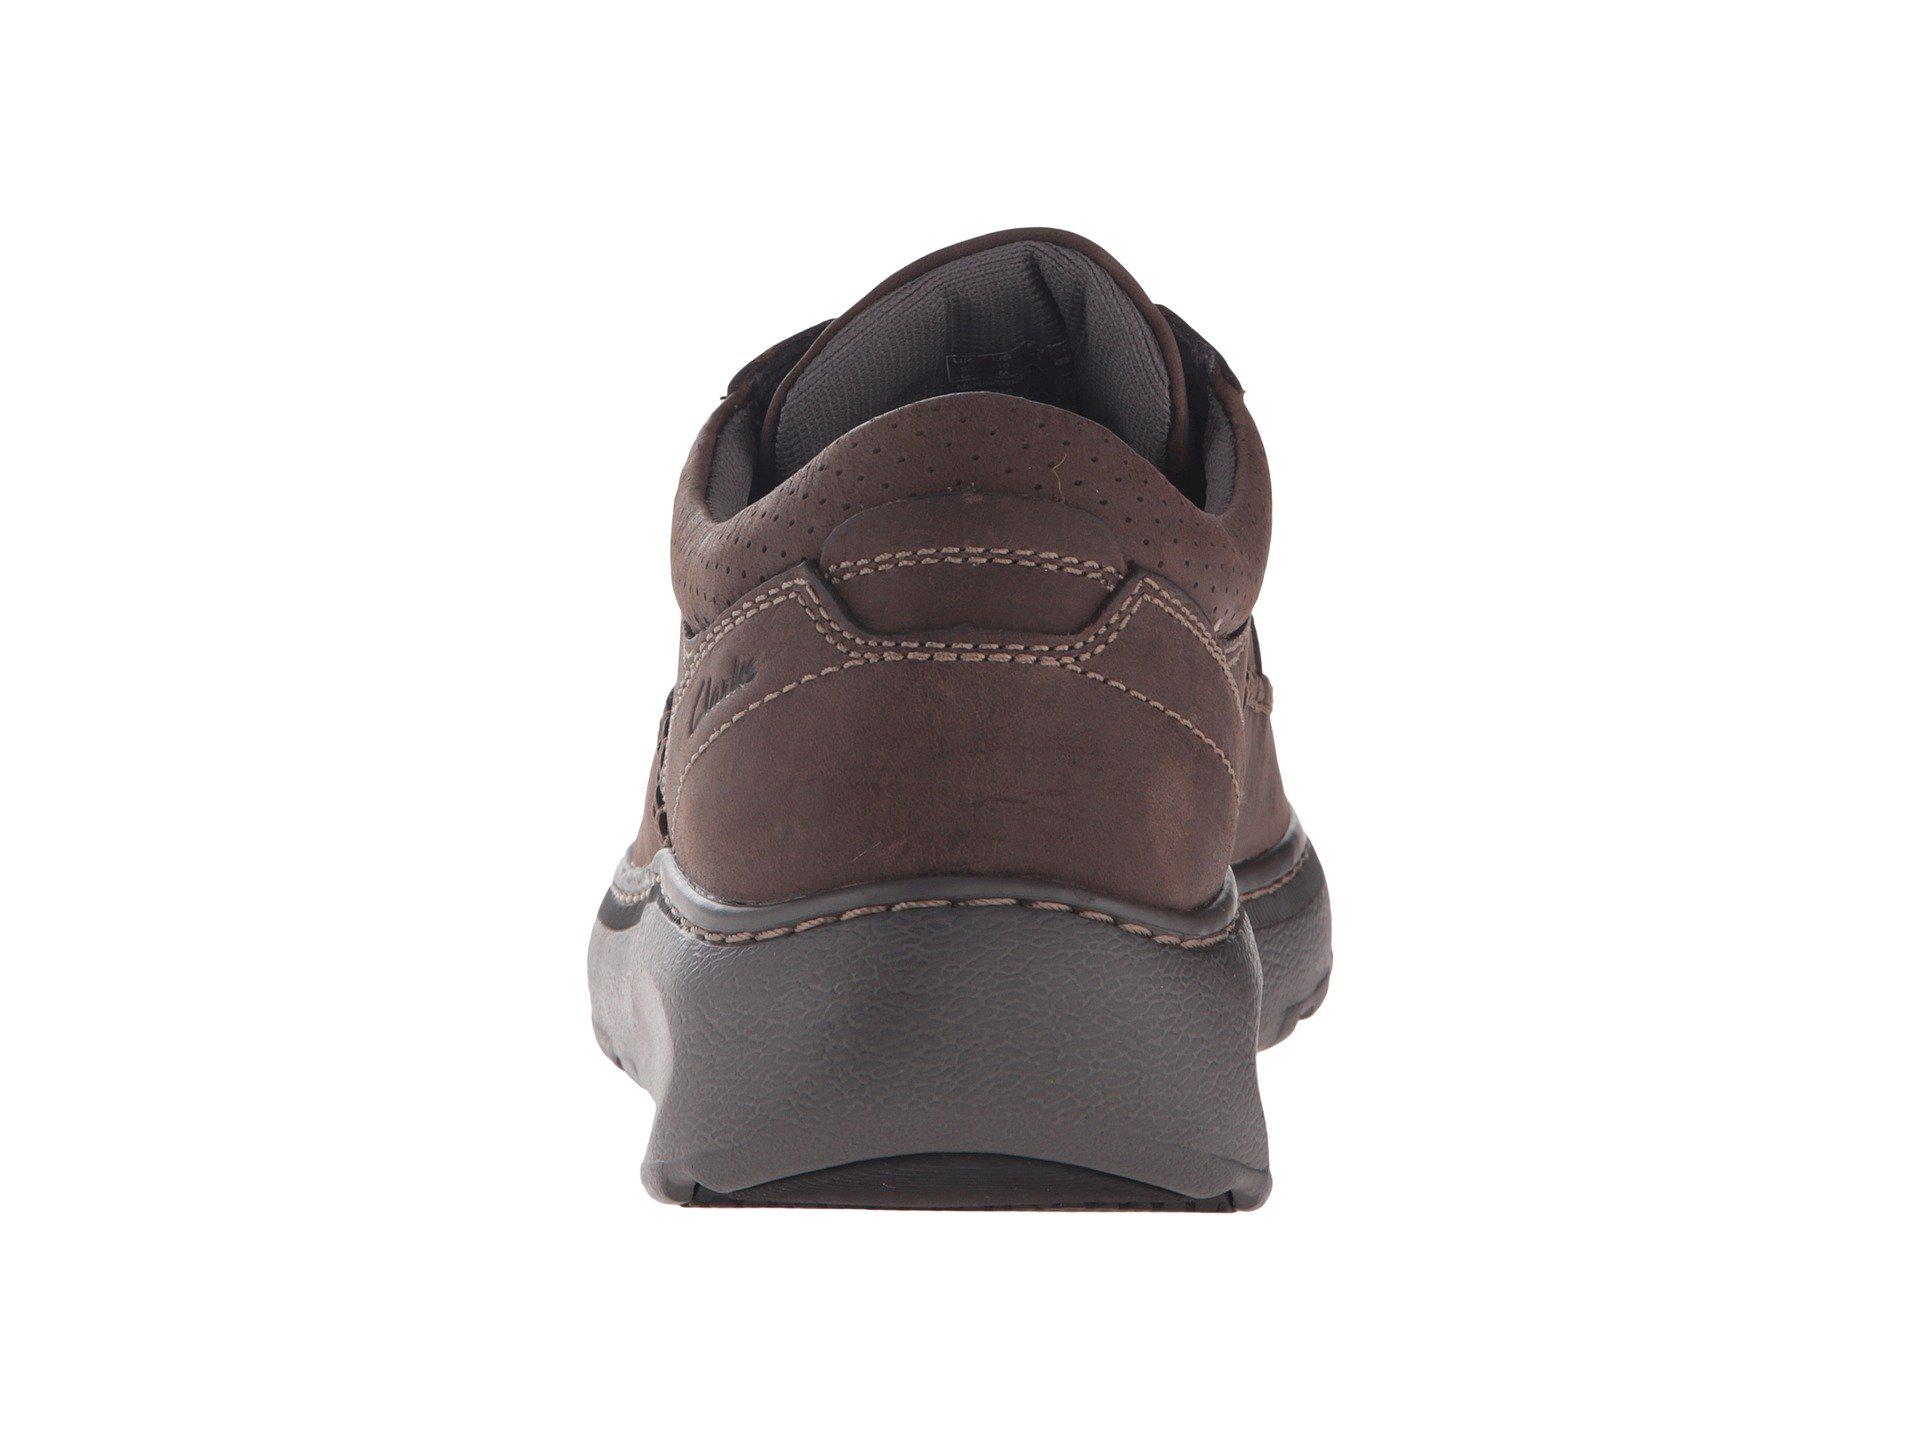 Clarks Vibe Brown Nubuck Hotsell, SAVE 54%.